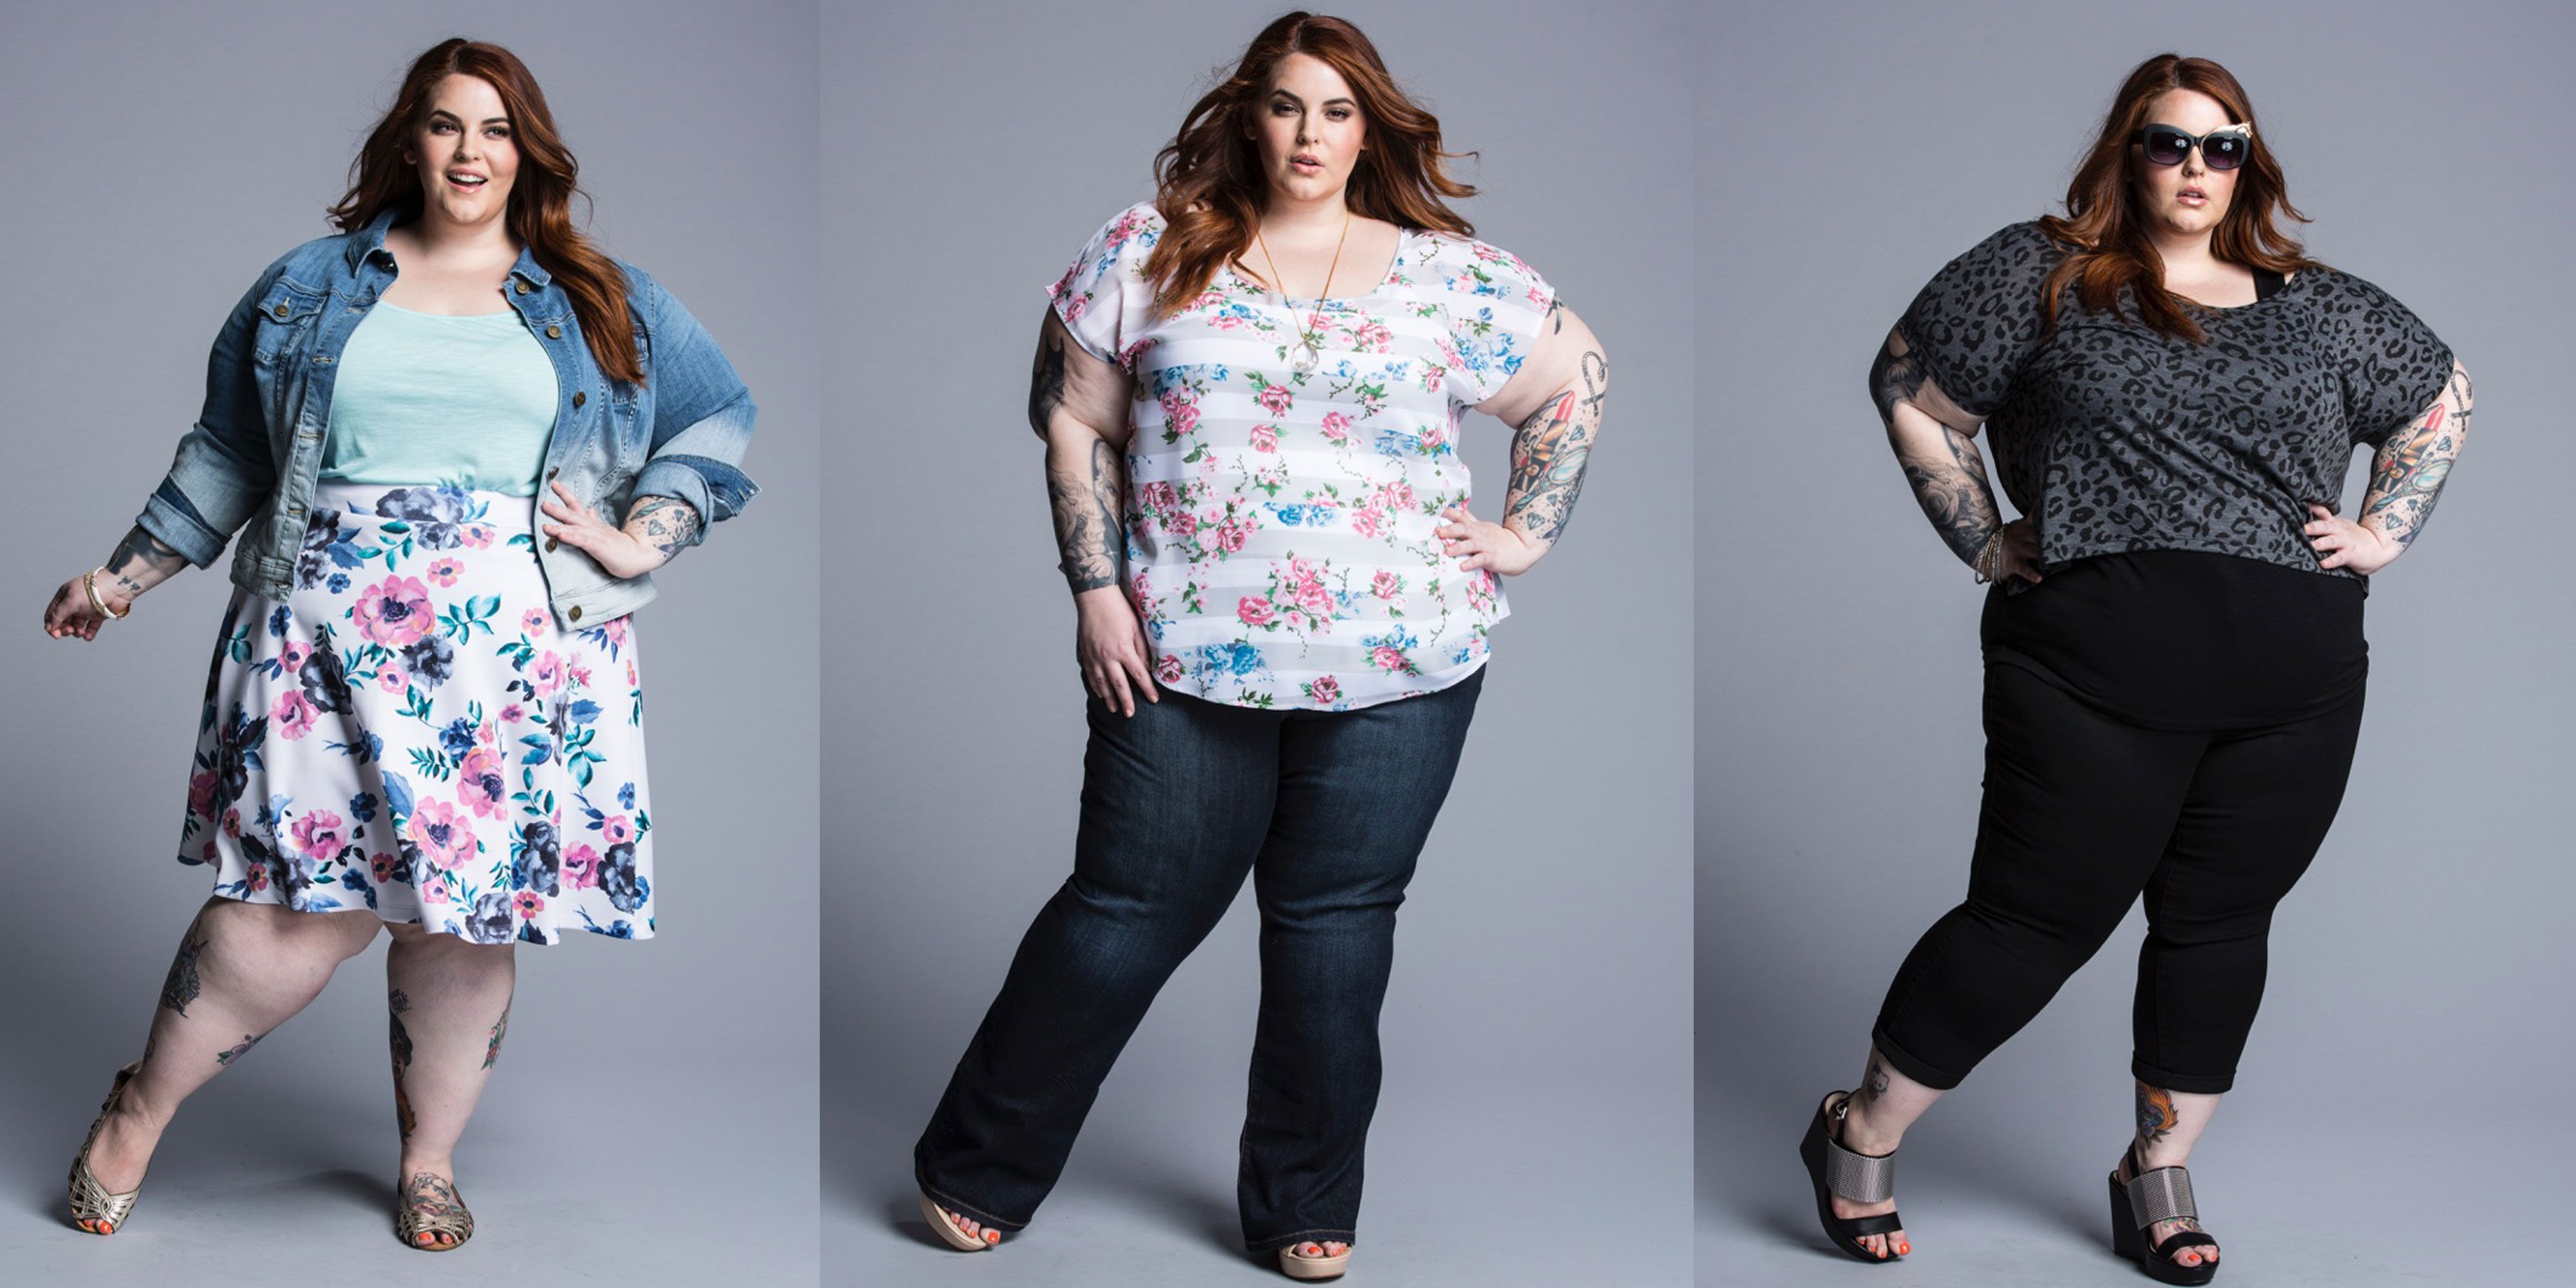 Plus-Size Model Holliday Slays First Ad Campaign With Torrid